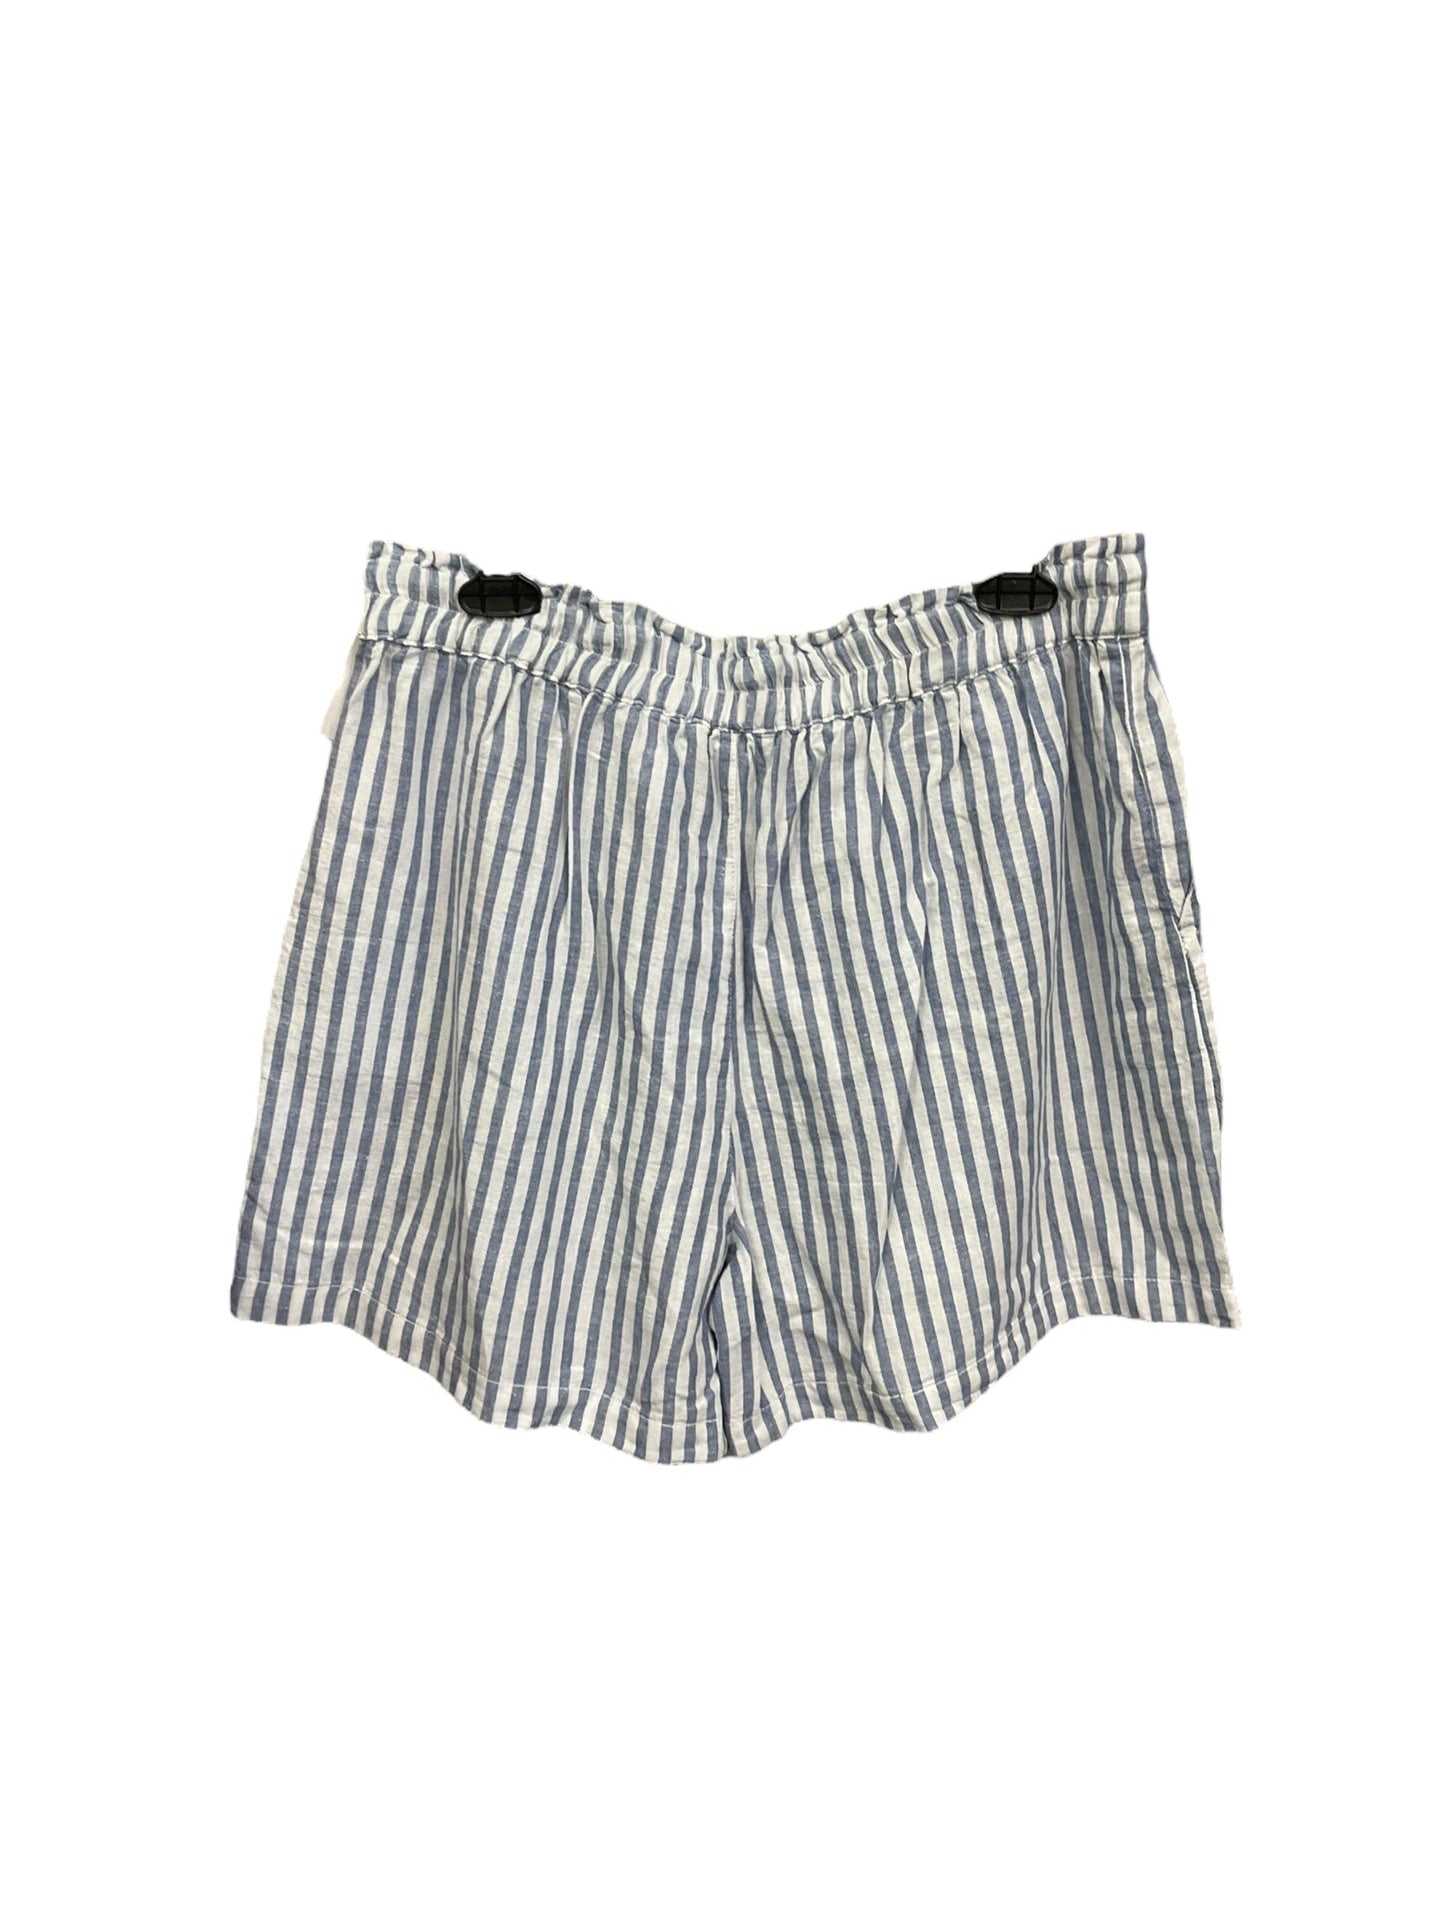 Shorts By Beachlunchlounge  Size: L